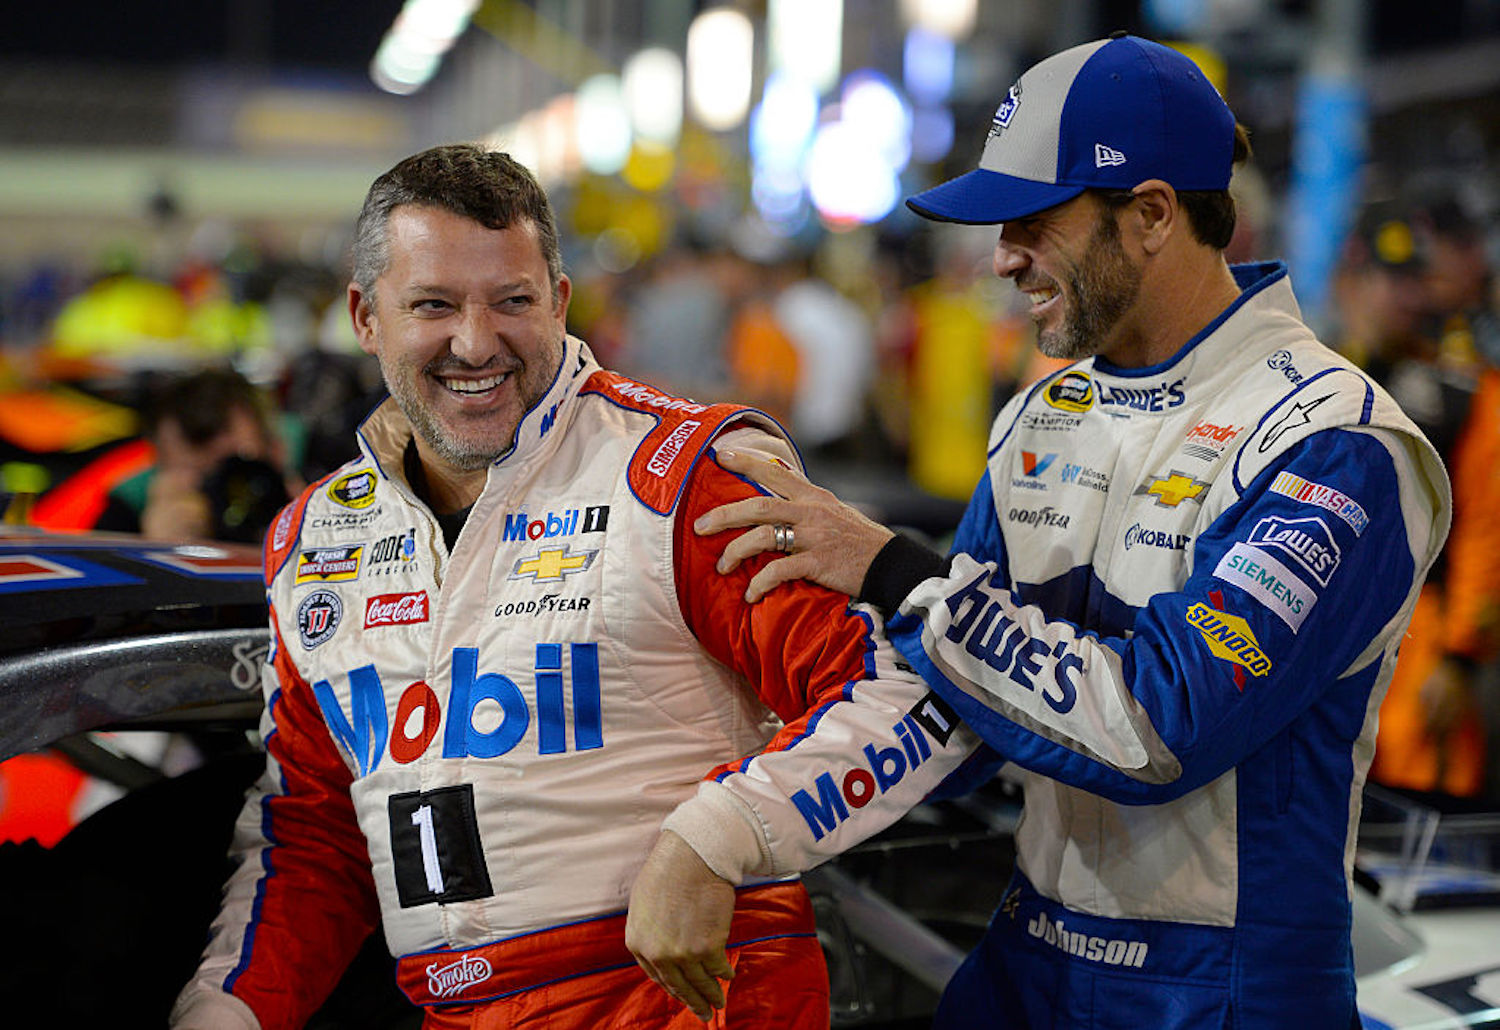 Tony Stewart recently told a hilarious story about how he had to save Jimmie Johnson after the NASCAR legend got stuck in an elevator.